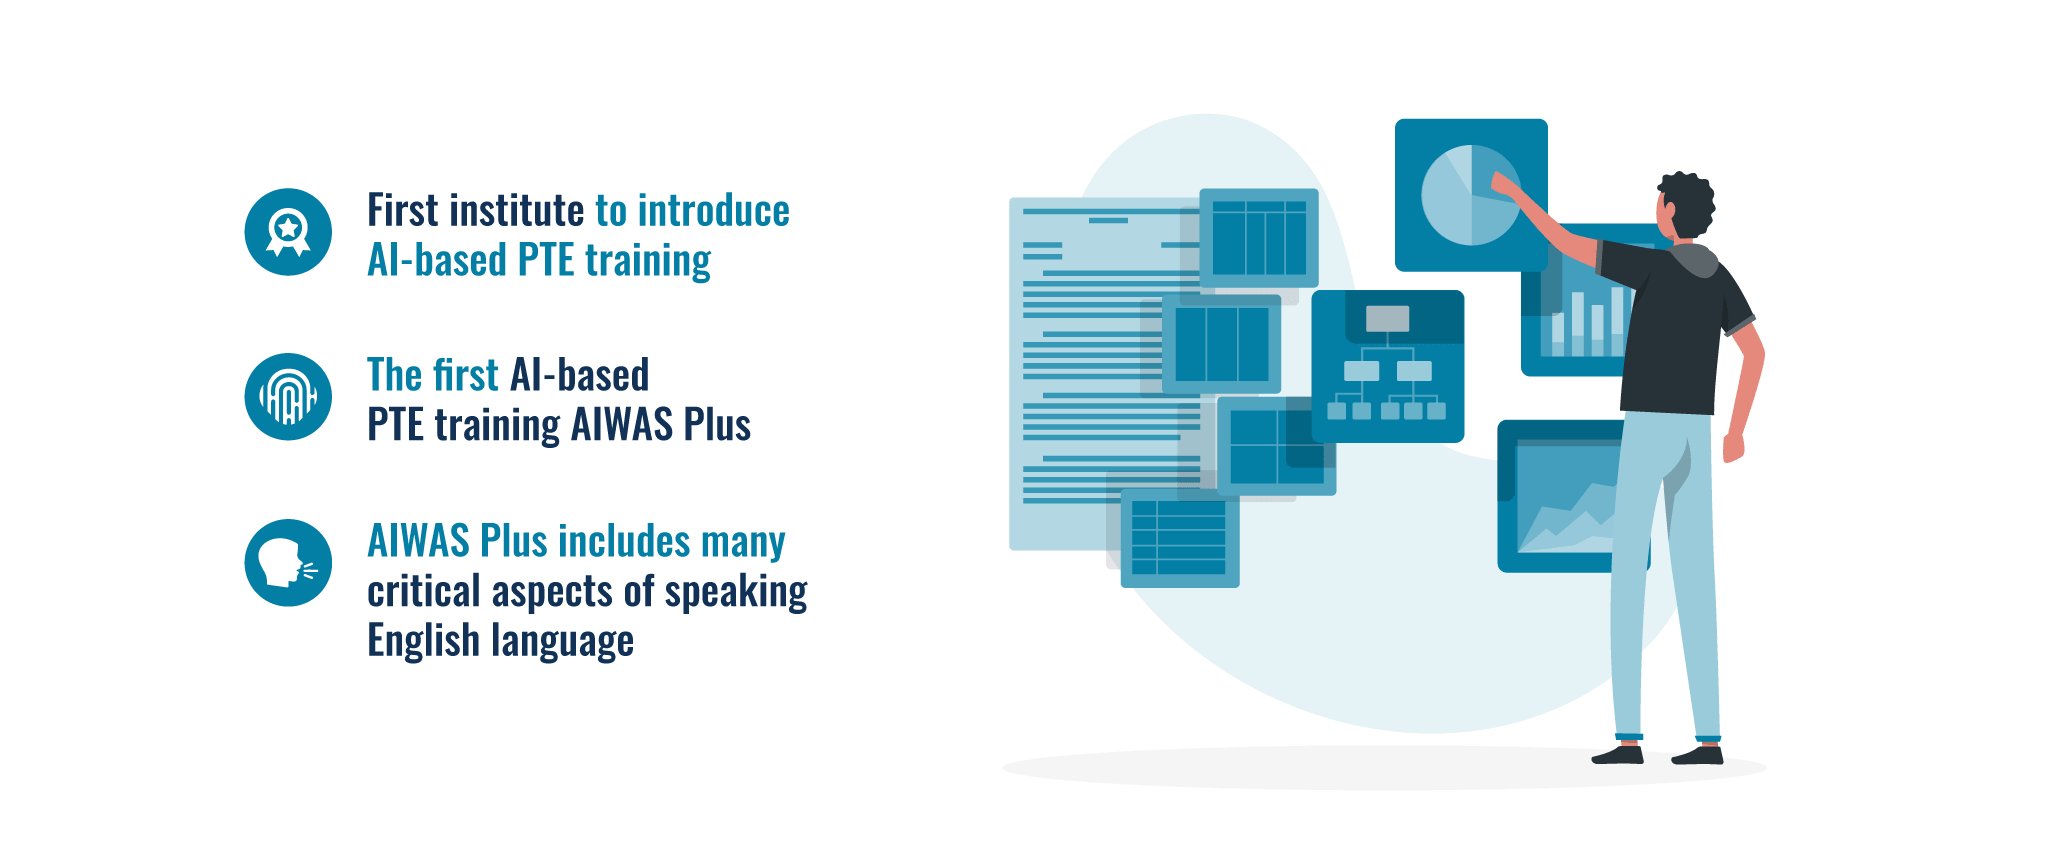 Features of AIWAS Plus